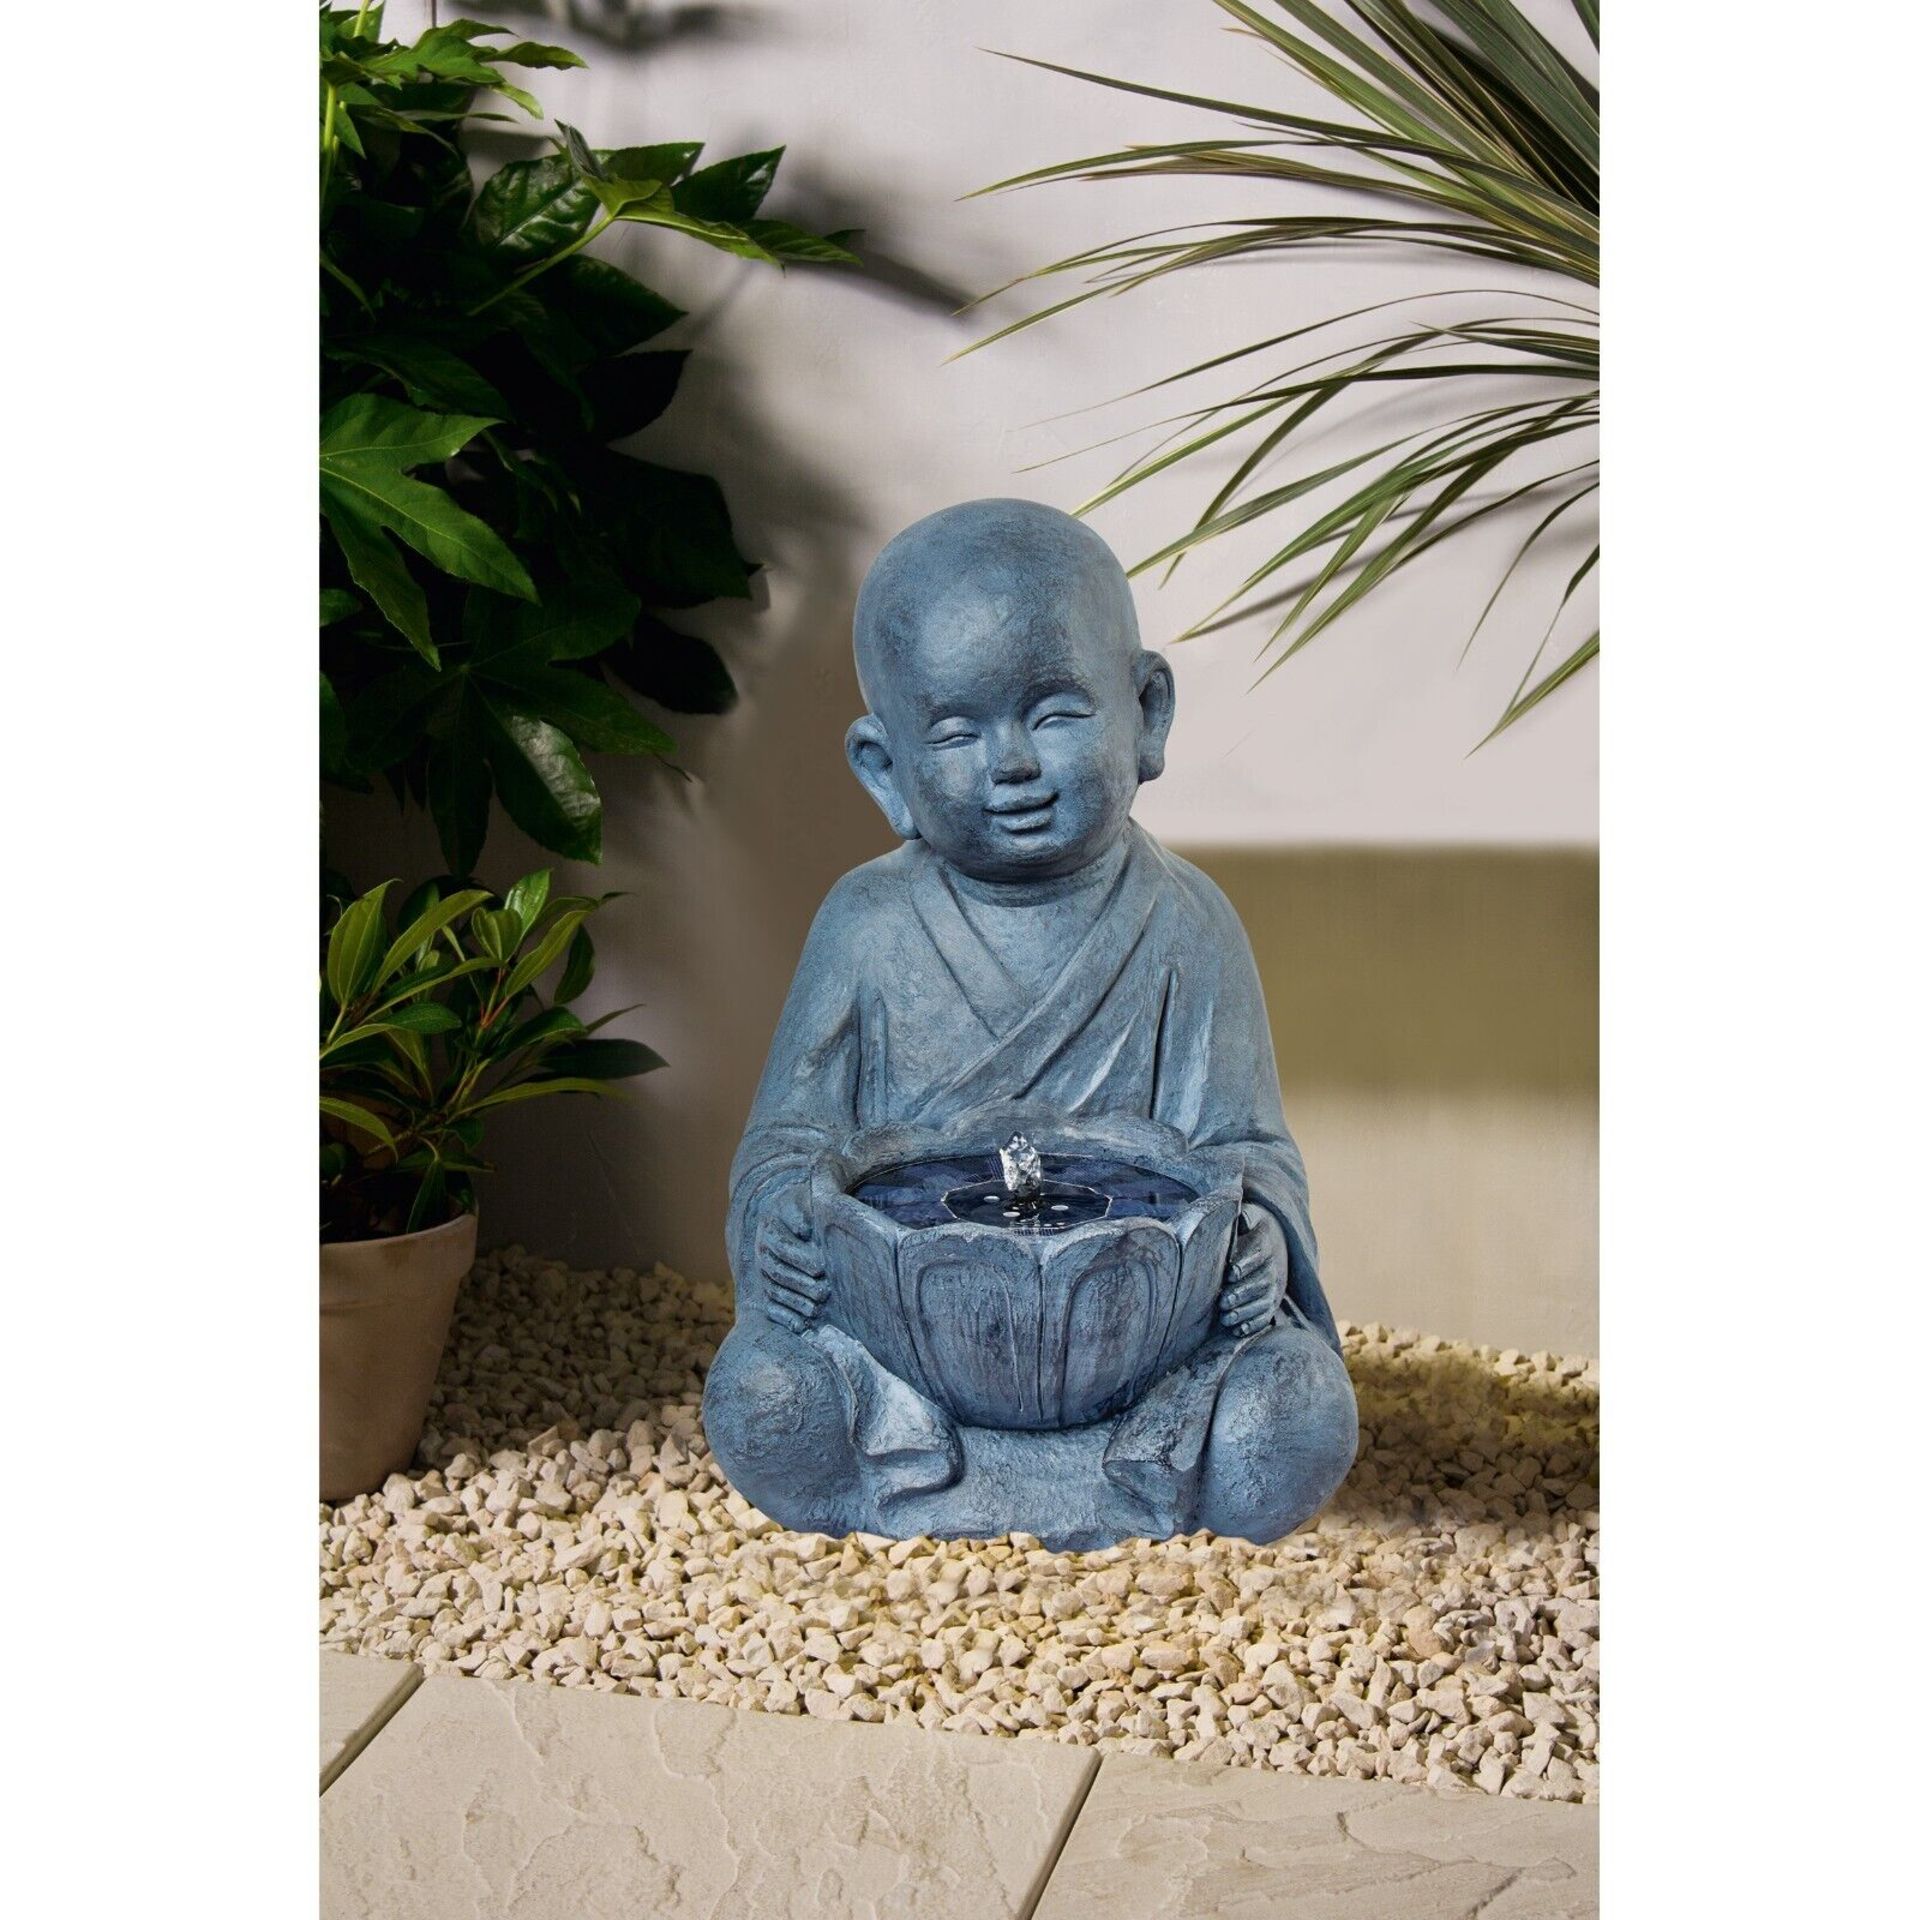 BRAND NEW BABY BUDDHA WATER FEATURE SOLAR ON DEMAND WITH WARM WHITE LED LIGHTS - Image 4 of 4